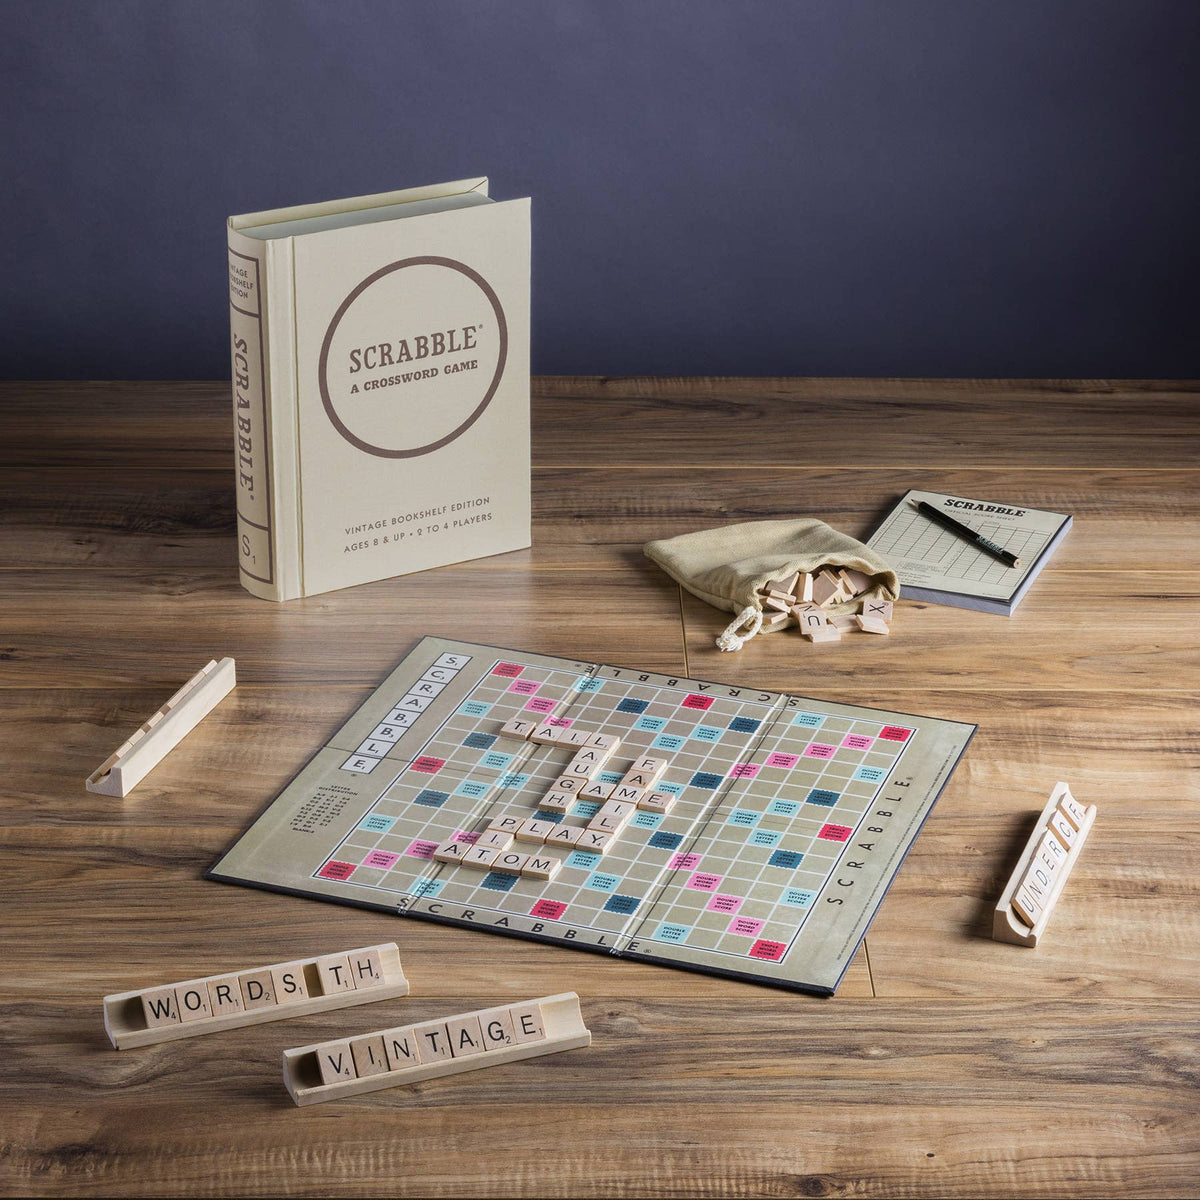 Vintage Bookshelf Edition: Scrabble-Games-Yellow Springs Toy Company